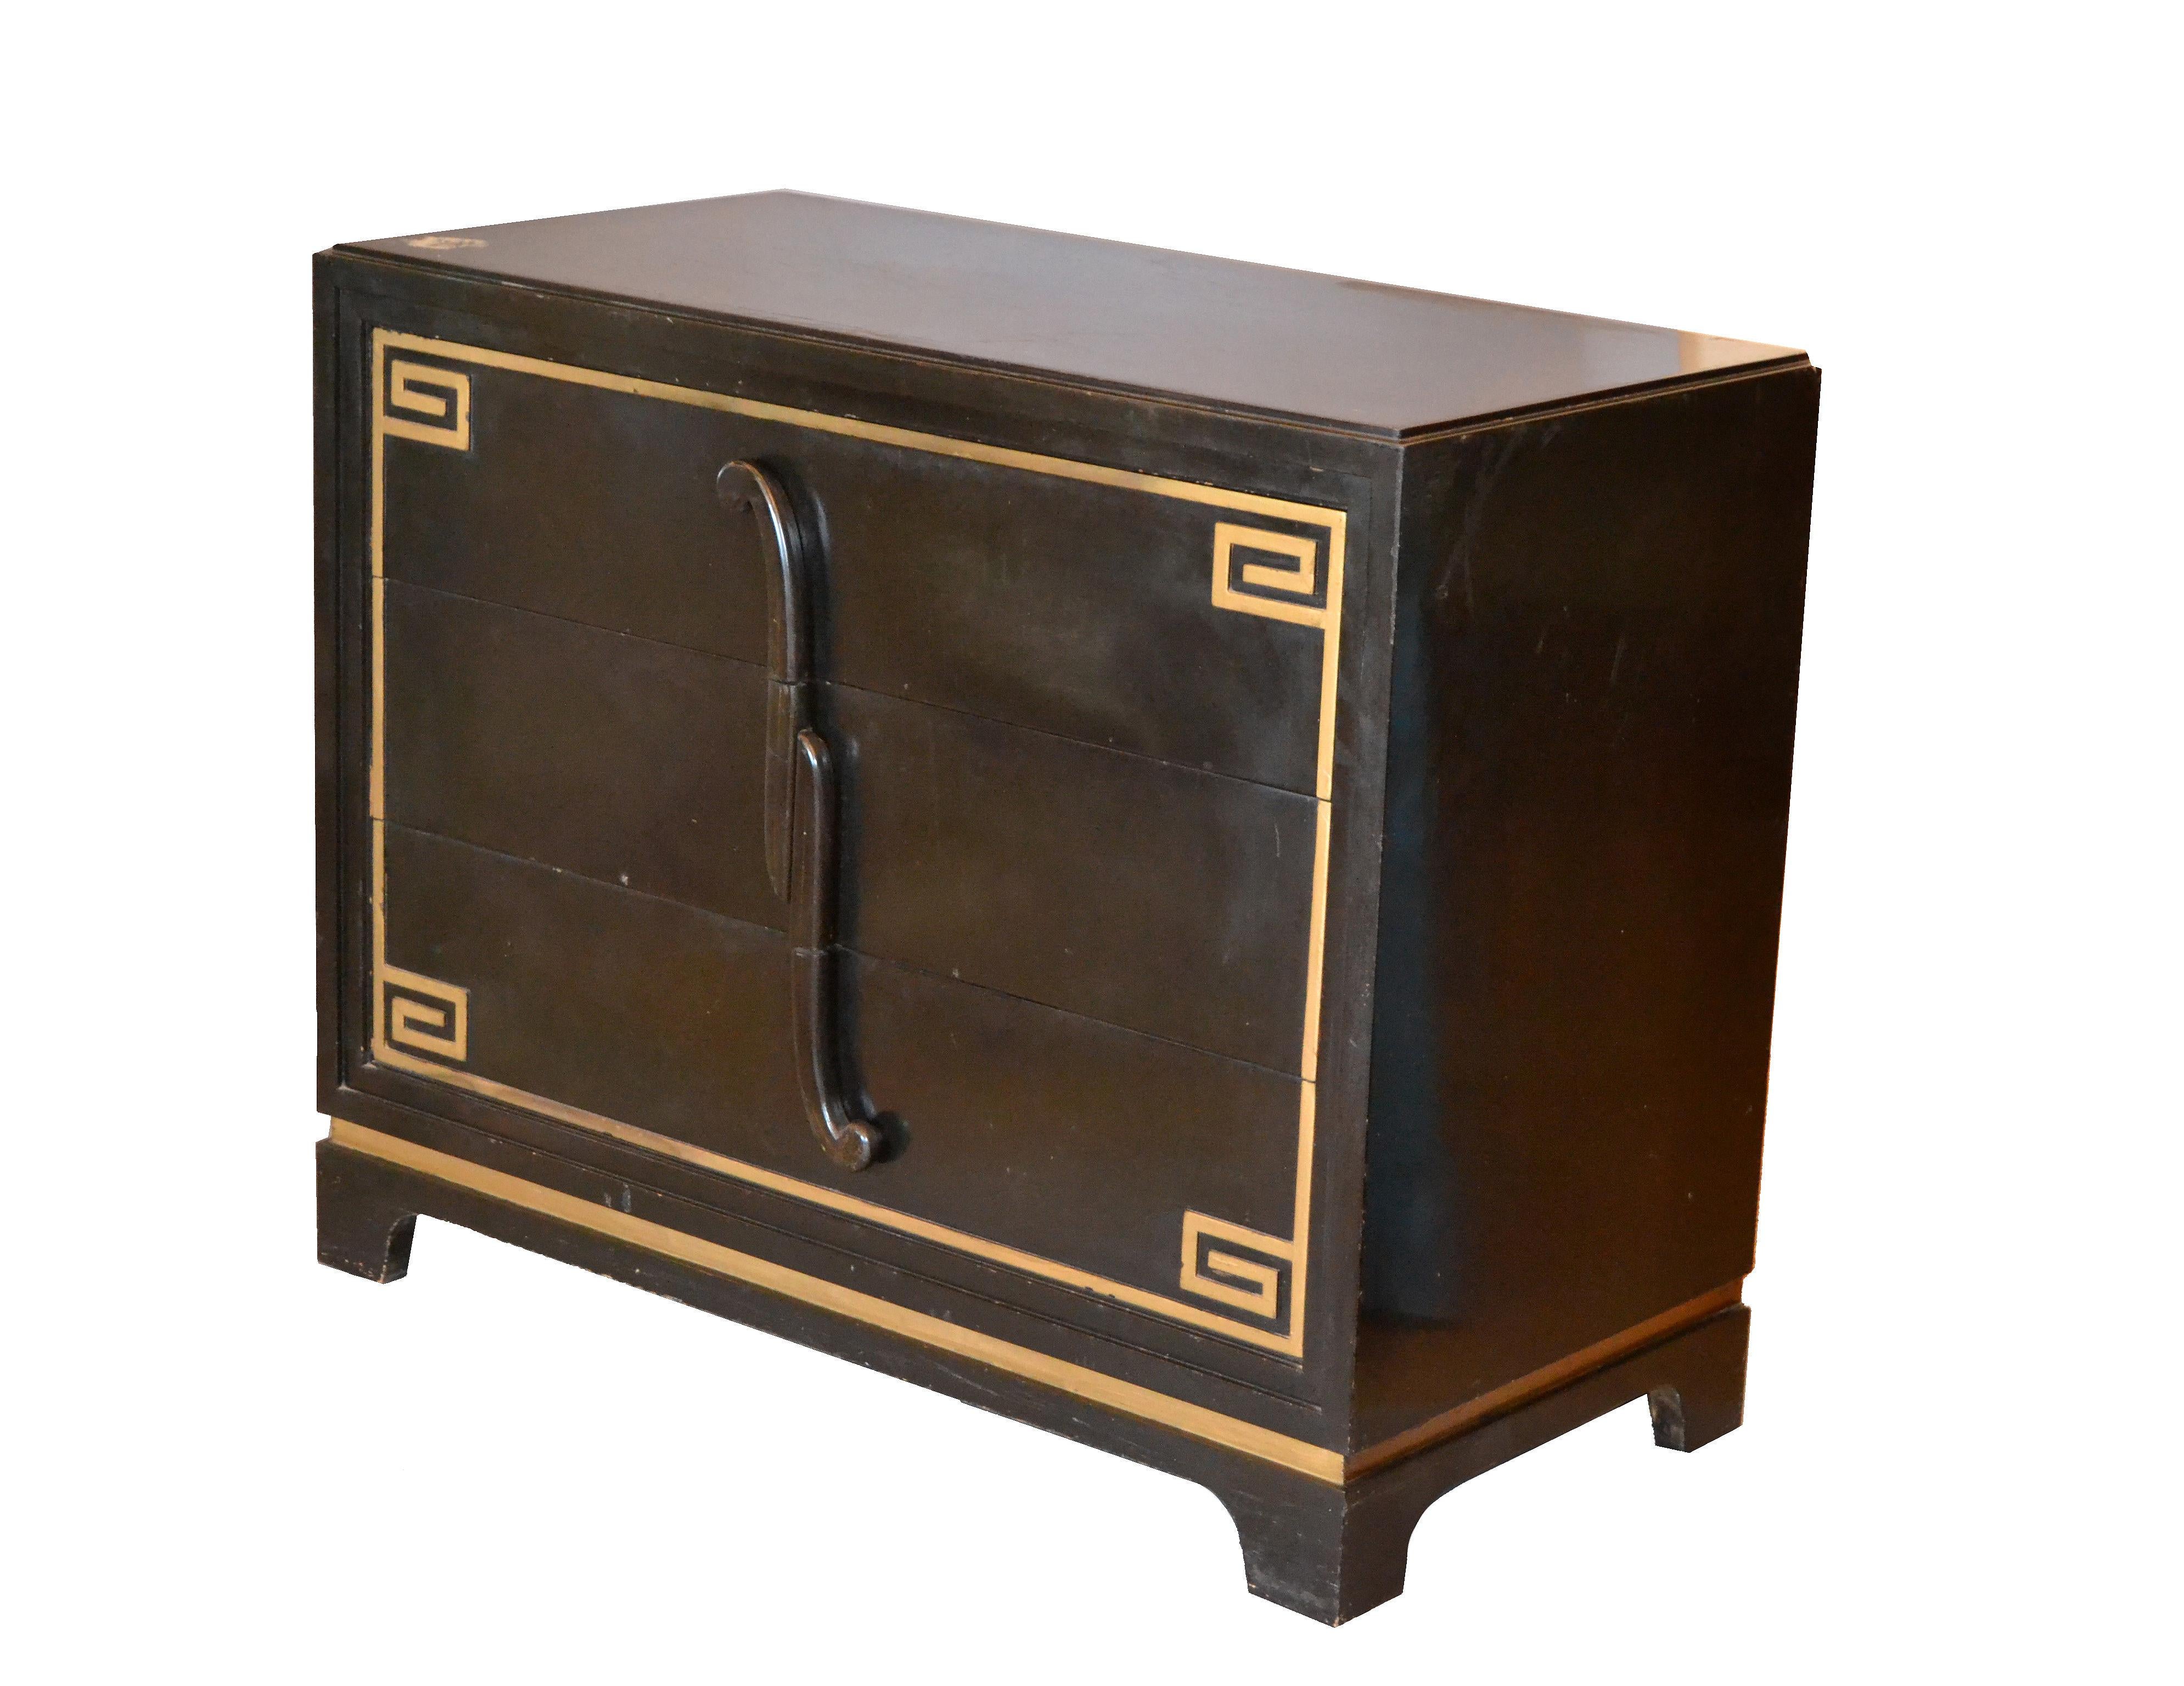 A matching pair of ebonized Greek key cabinets in the style of Grosfeld House with golden Greek key accents.
Each cabinet comes with three dovetailed drawers.
Note: The set needs to be restored.